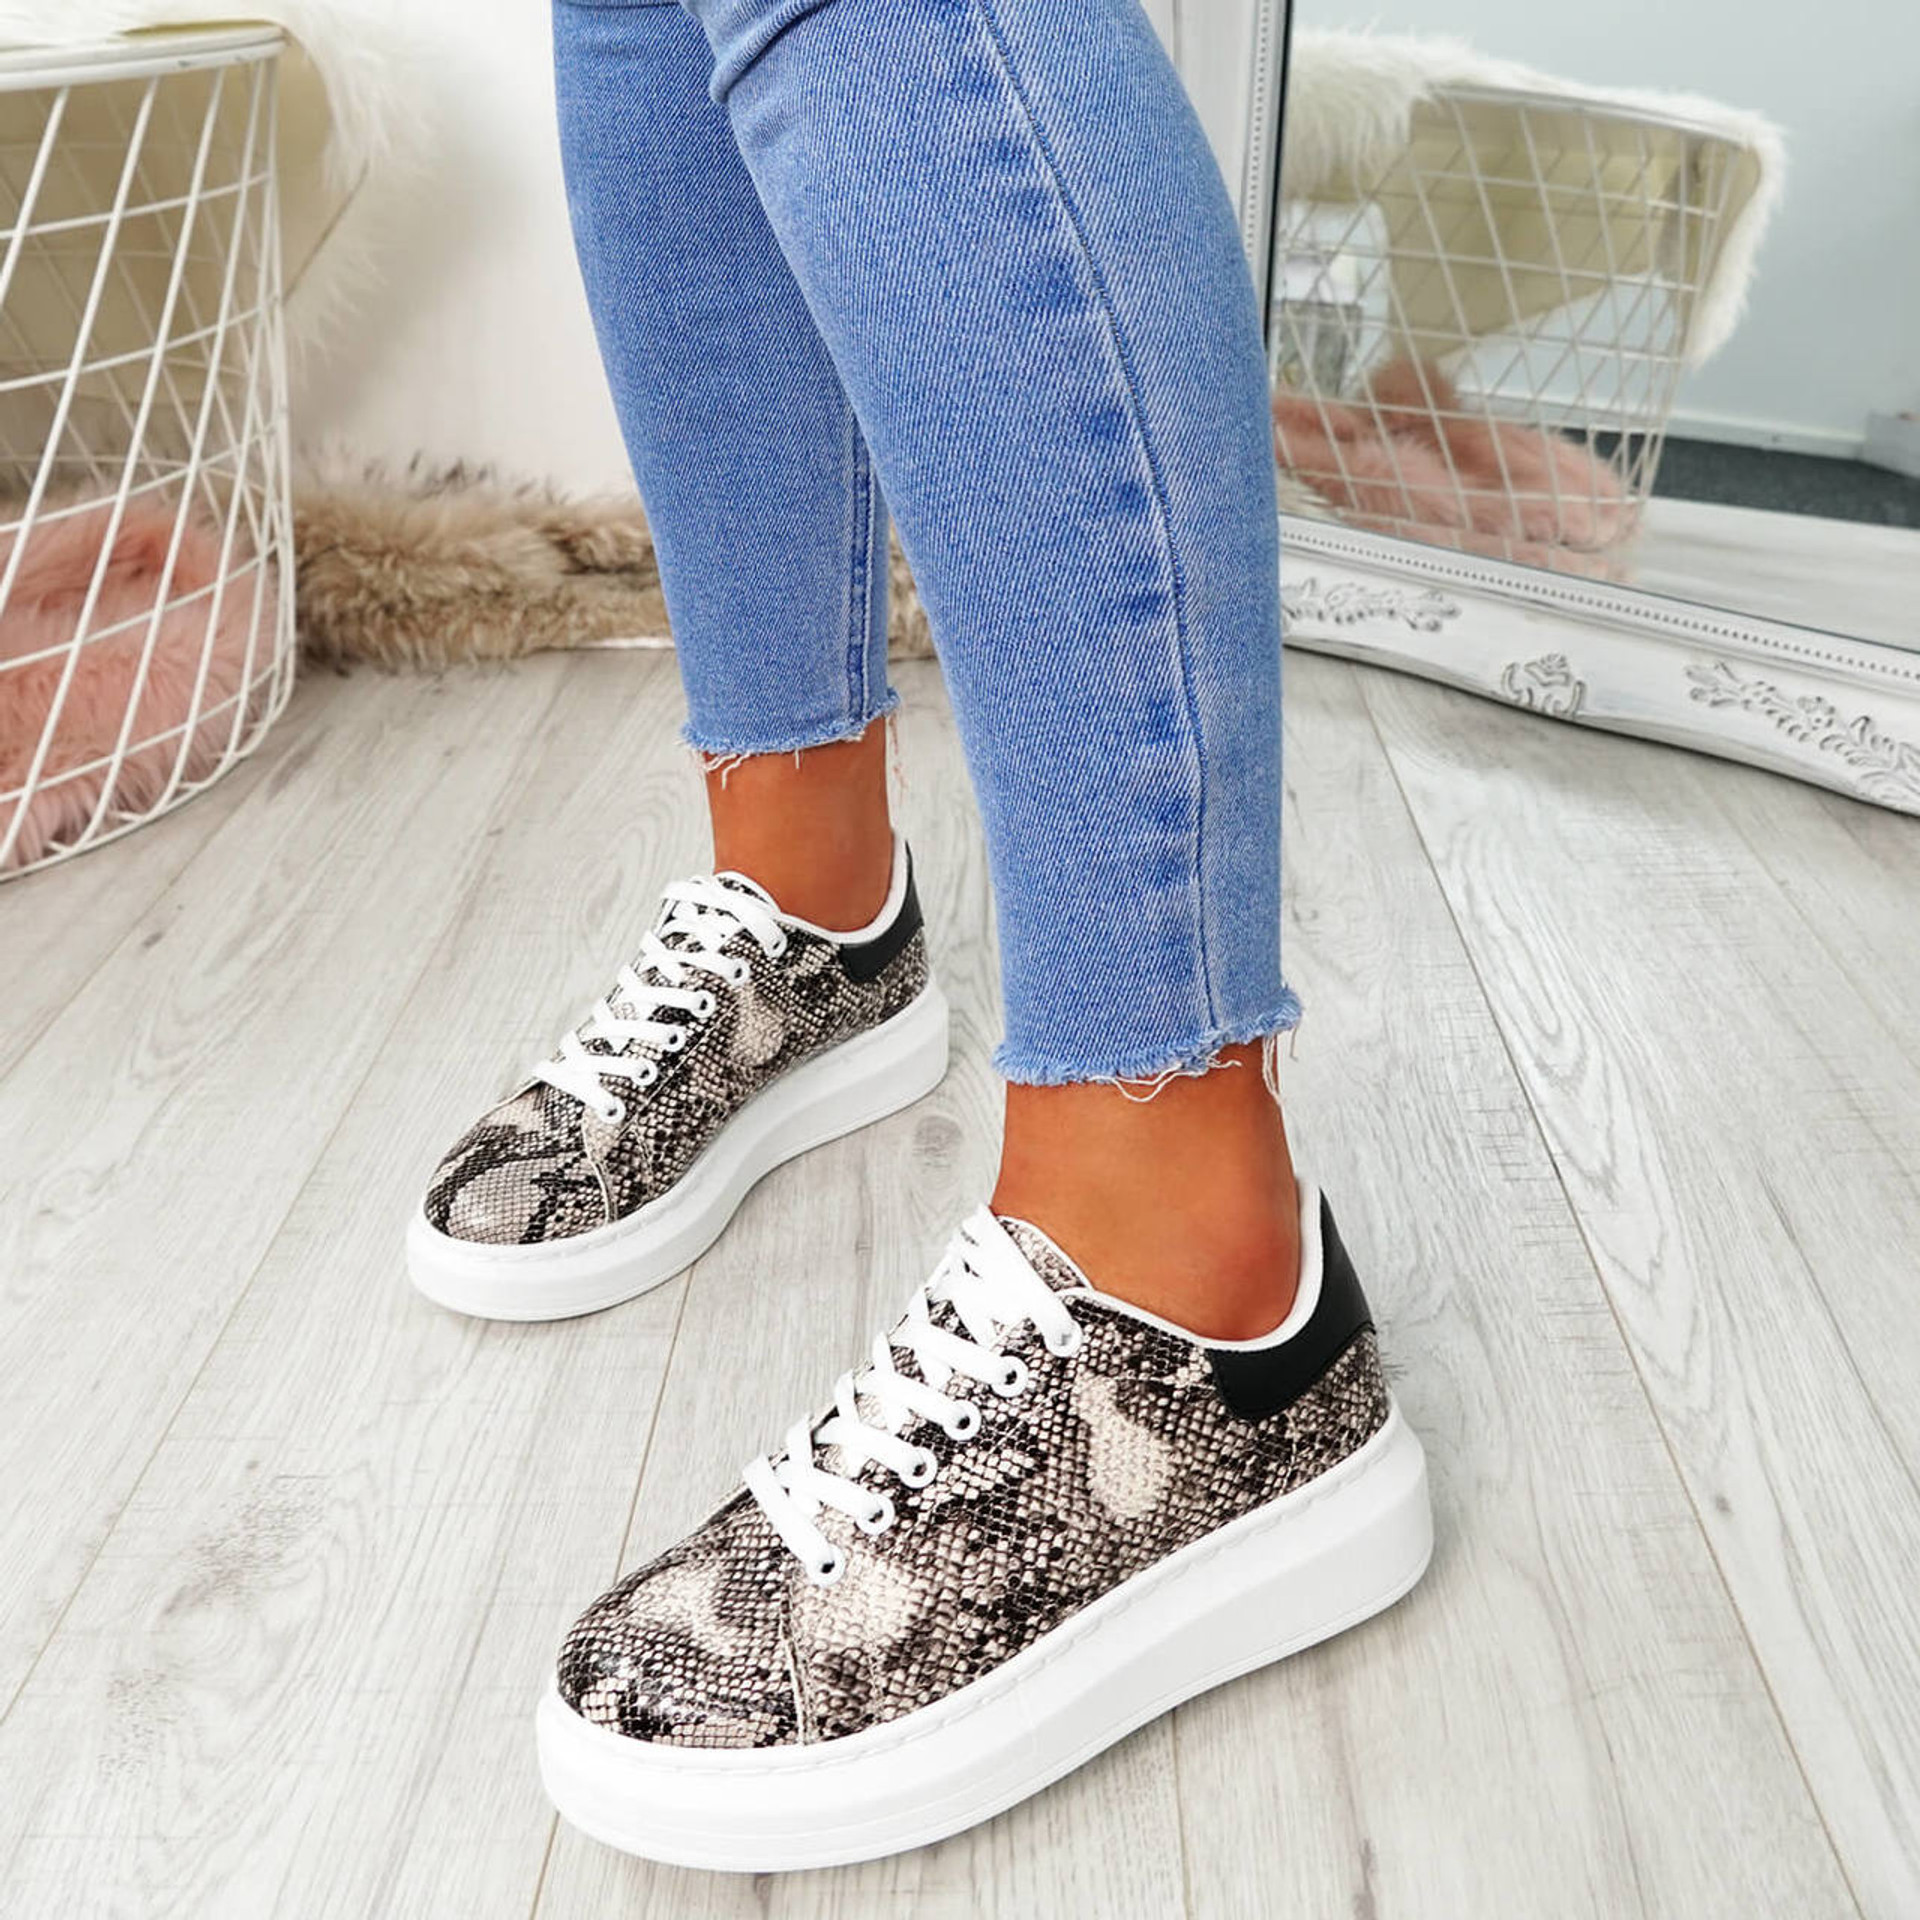 Picma Snake Lace Up Trainers